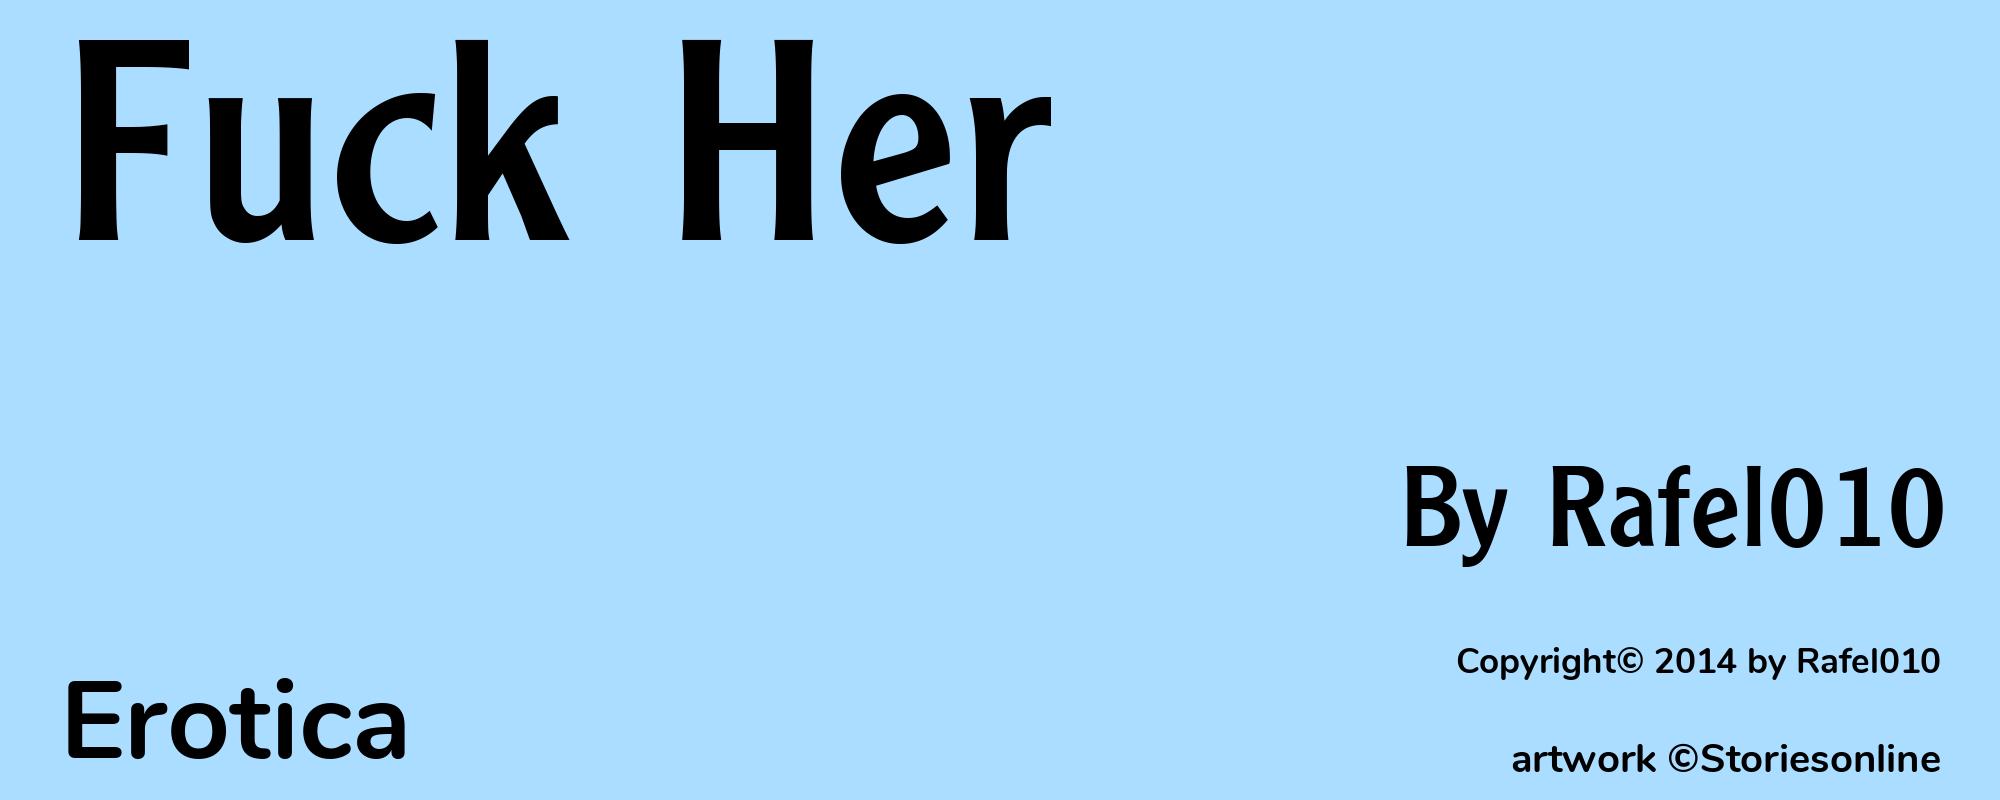 Fuck Her - Cover